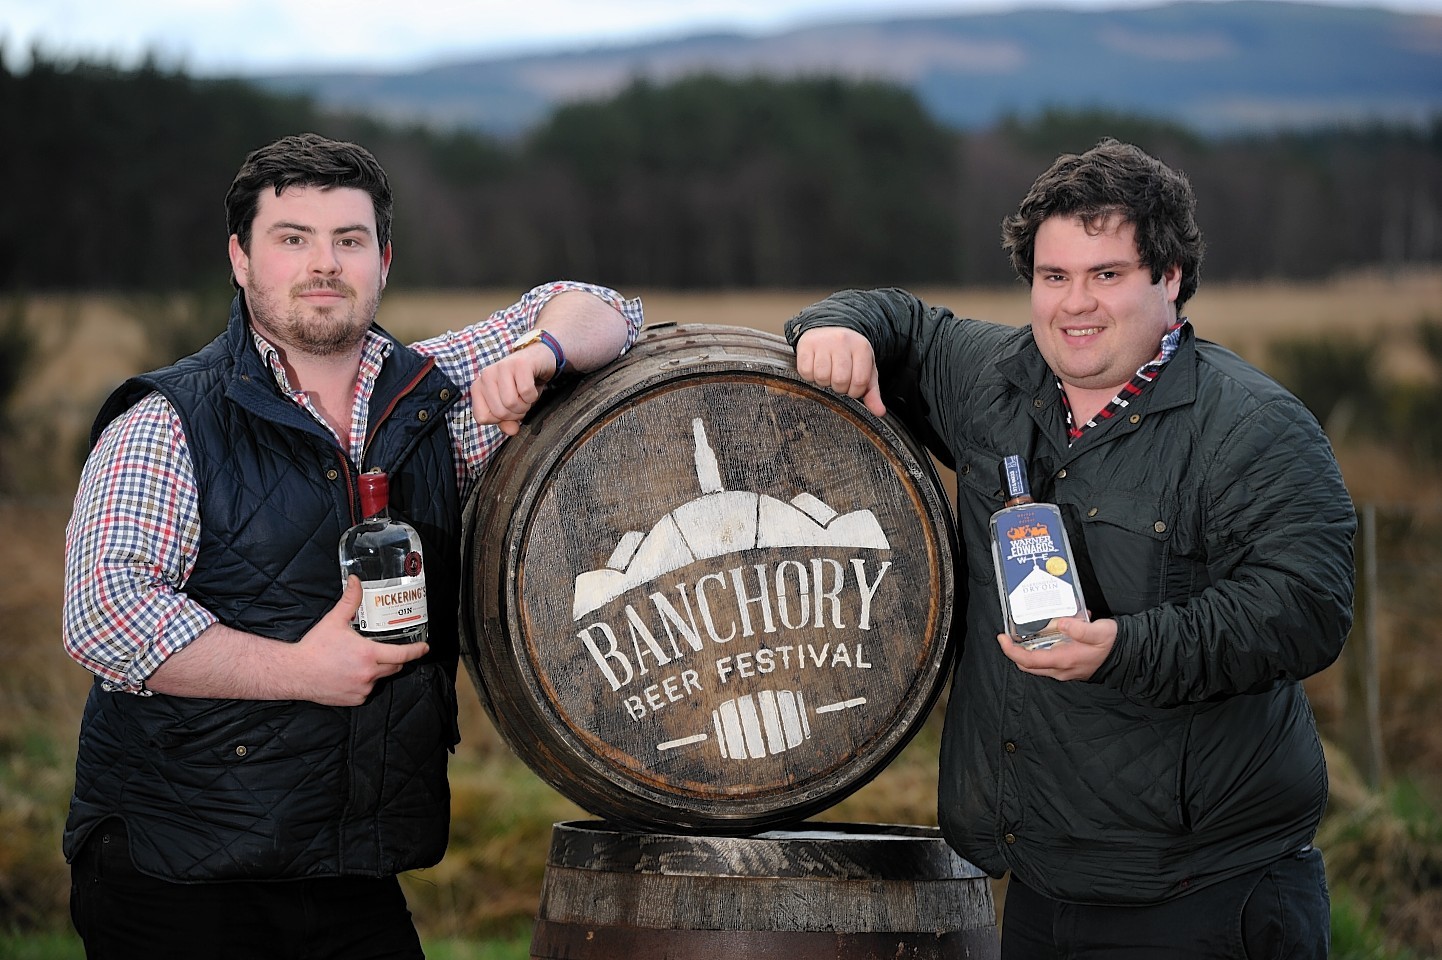 Organisers of the Banchory Beer Festival Mungo and Guy Finlayson have announced an Inverurie Beer Festival as a second summer event for Aberdeenshire. Fact 6:  A Beer Wave of 388,000 Gallons (or 1.4m L) flooded London in 1814 after a huge vat ruptured